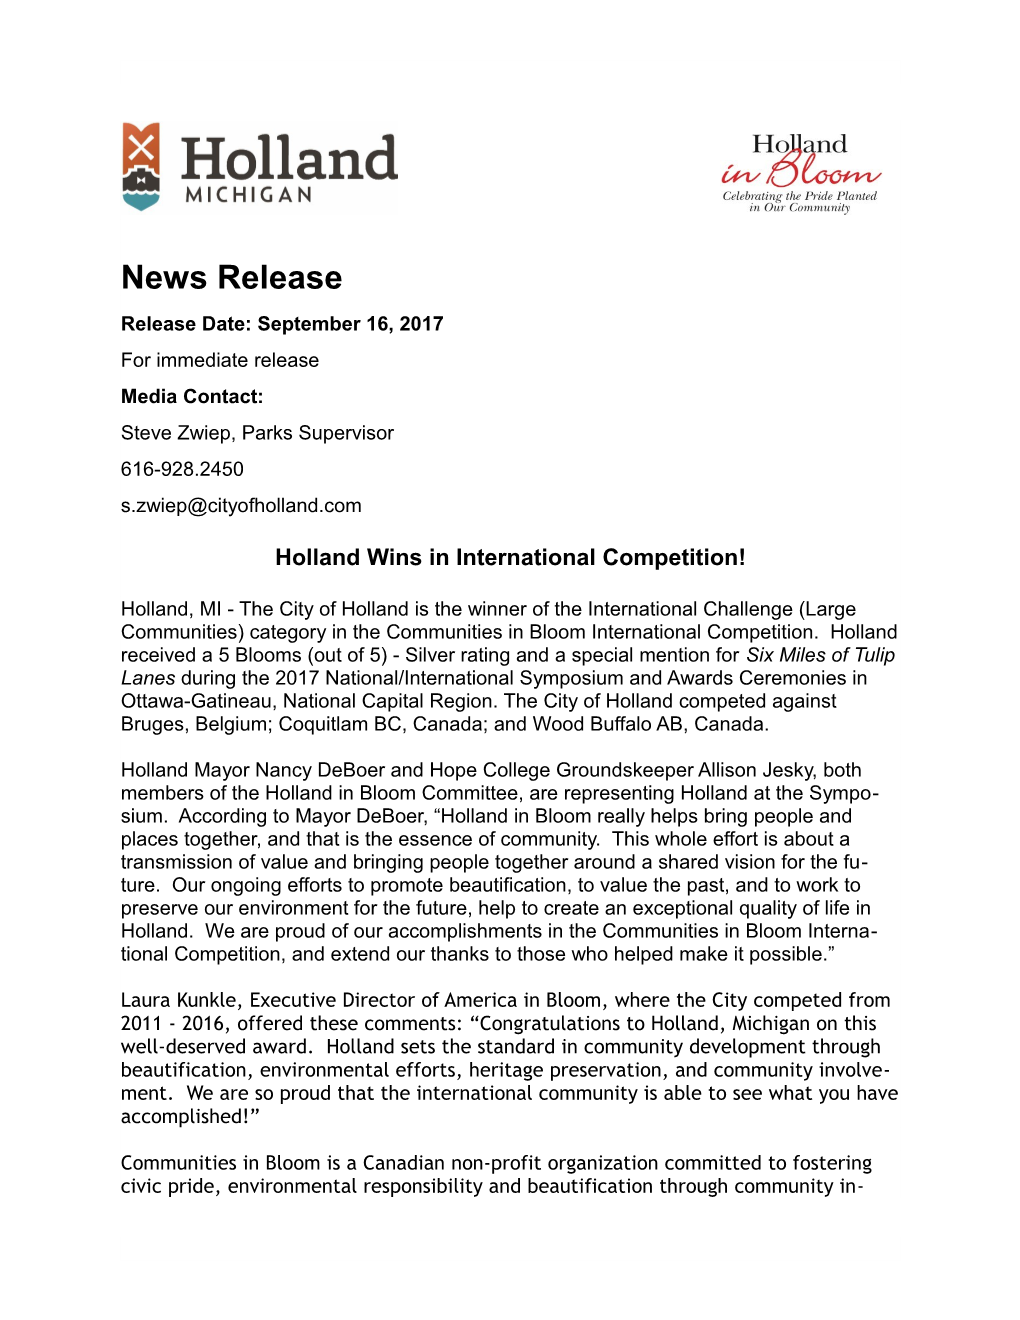 Holland Wins in International Competition!